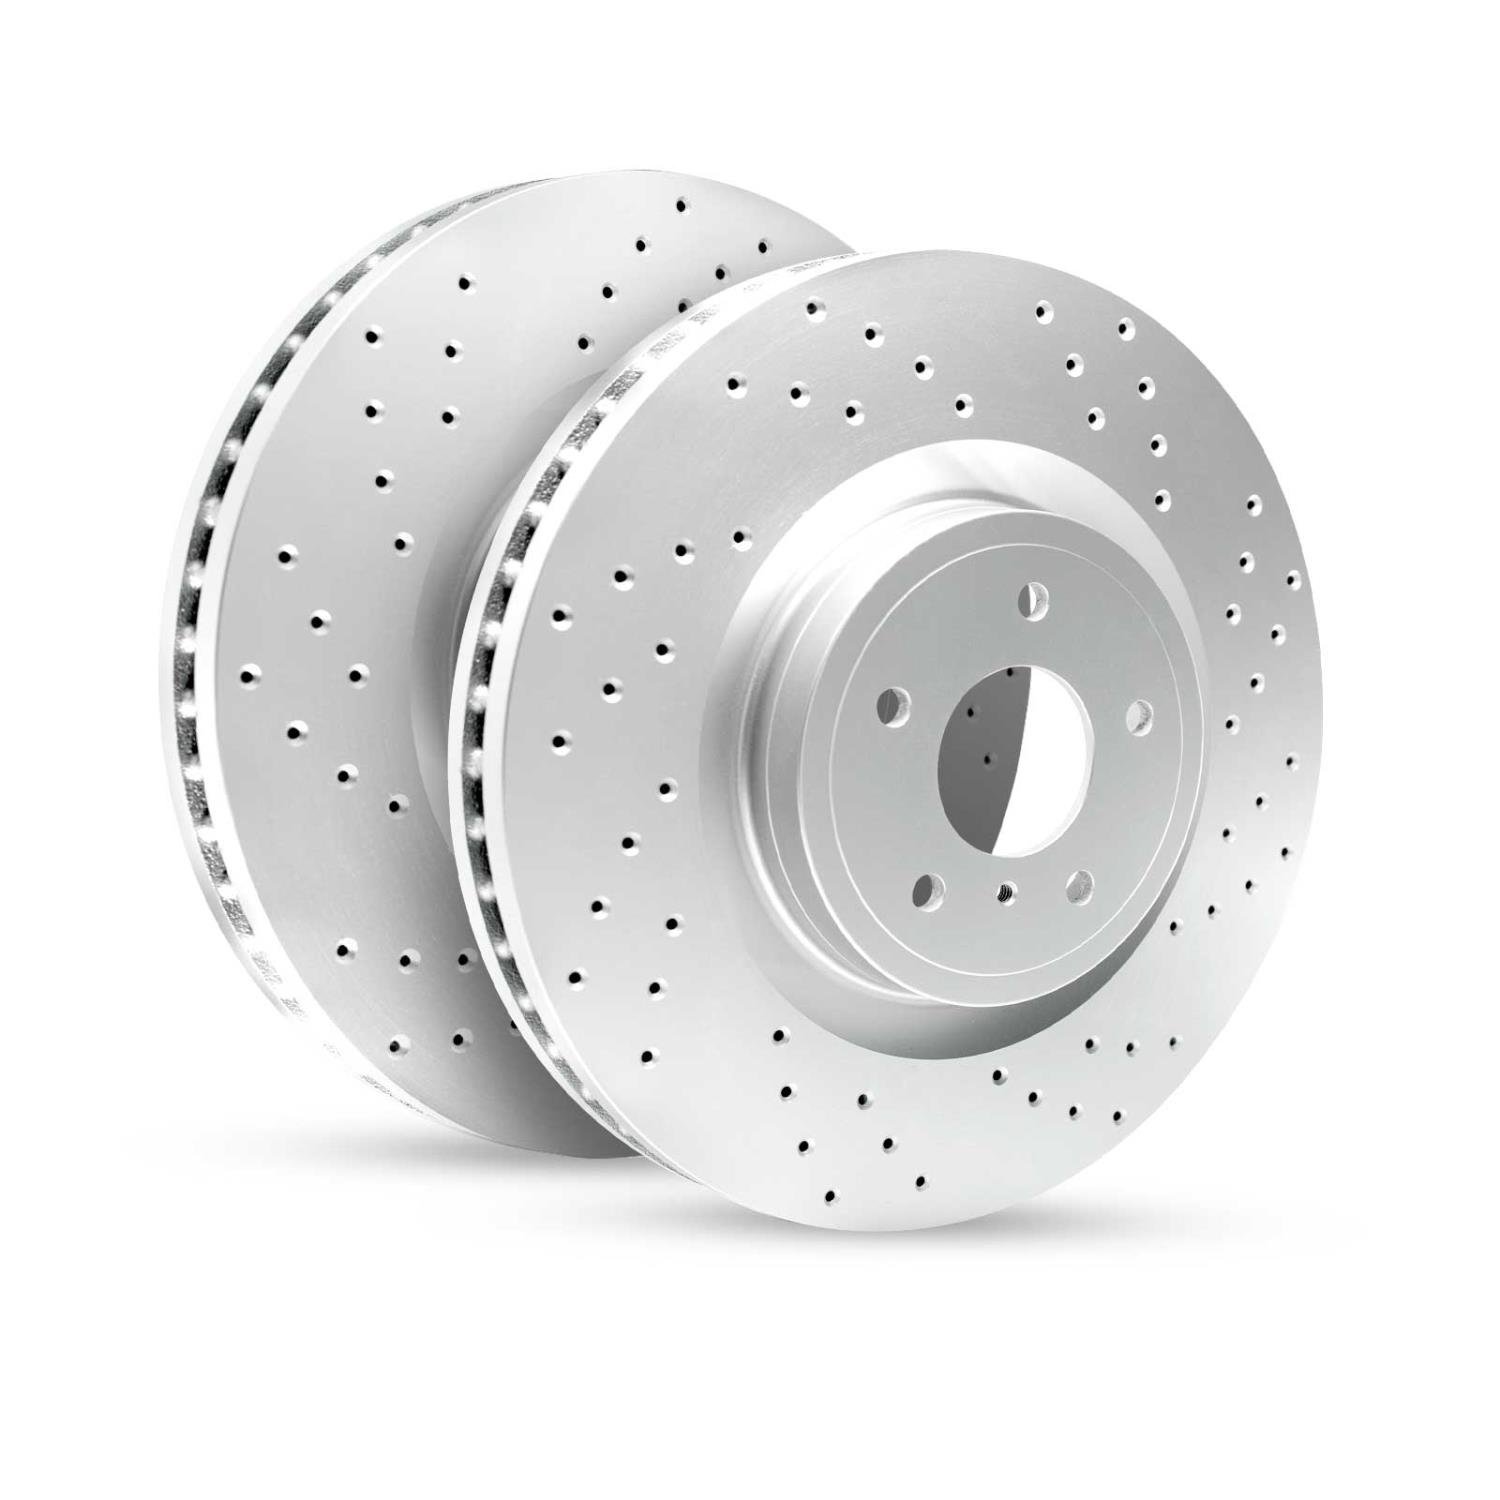 GEO-Carbon Drilled/Slotted Rotors, 1990-2008 Fits Multiple Makes/Models, Position: Rear